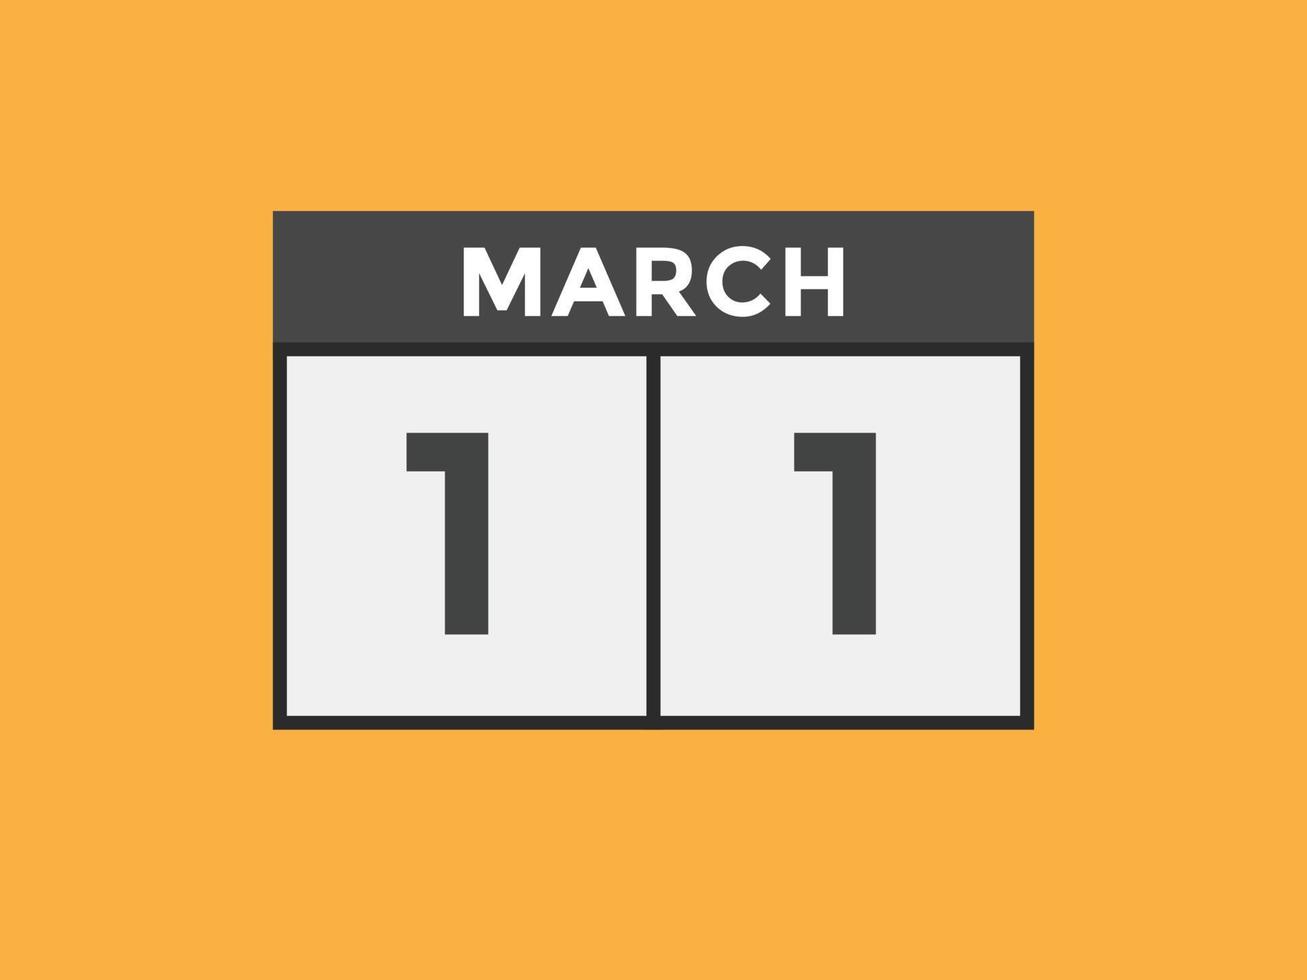 march 11 calendar reminder. 11th march daily calendar icon template. Calendar 11th march icon Design template. Vector illustration